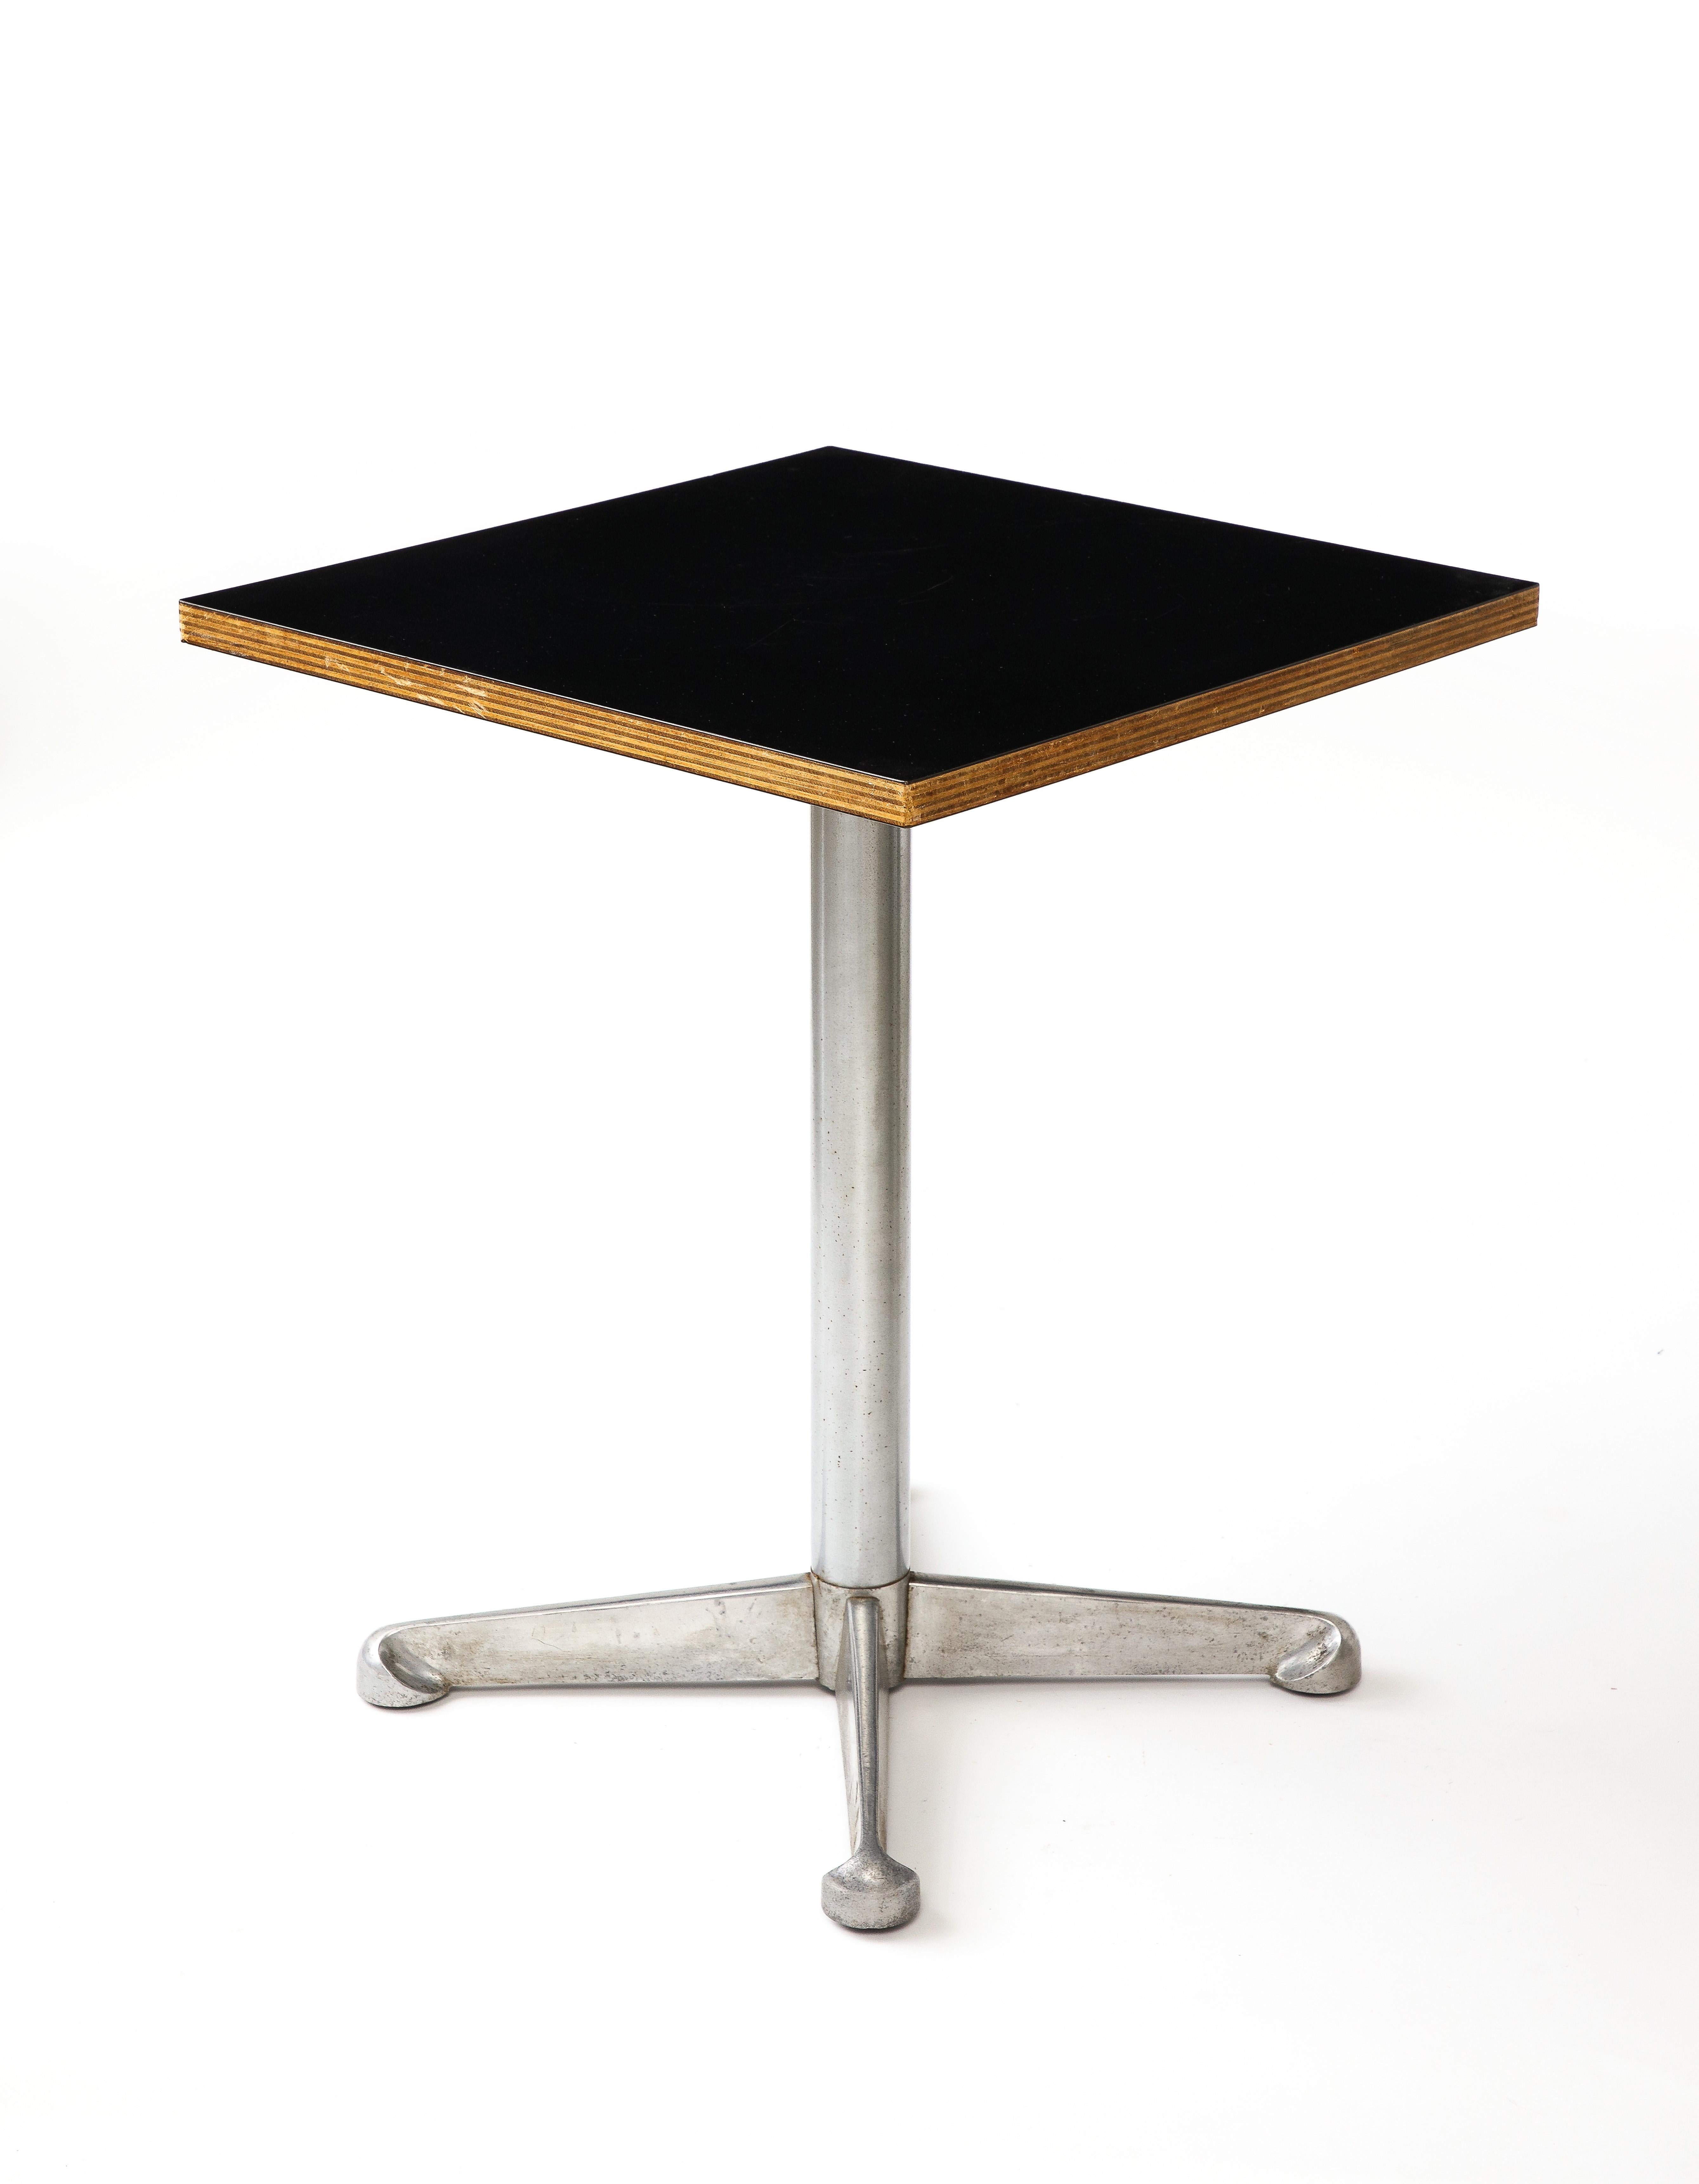 Italian Steel and Laminate Side Table by Tecno, Italy, c. 1960 For Sale